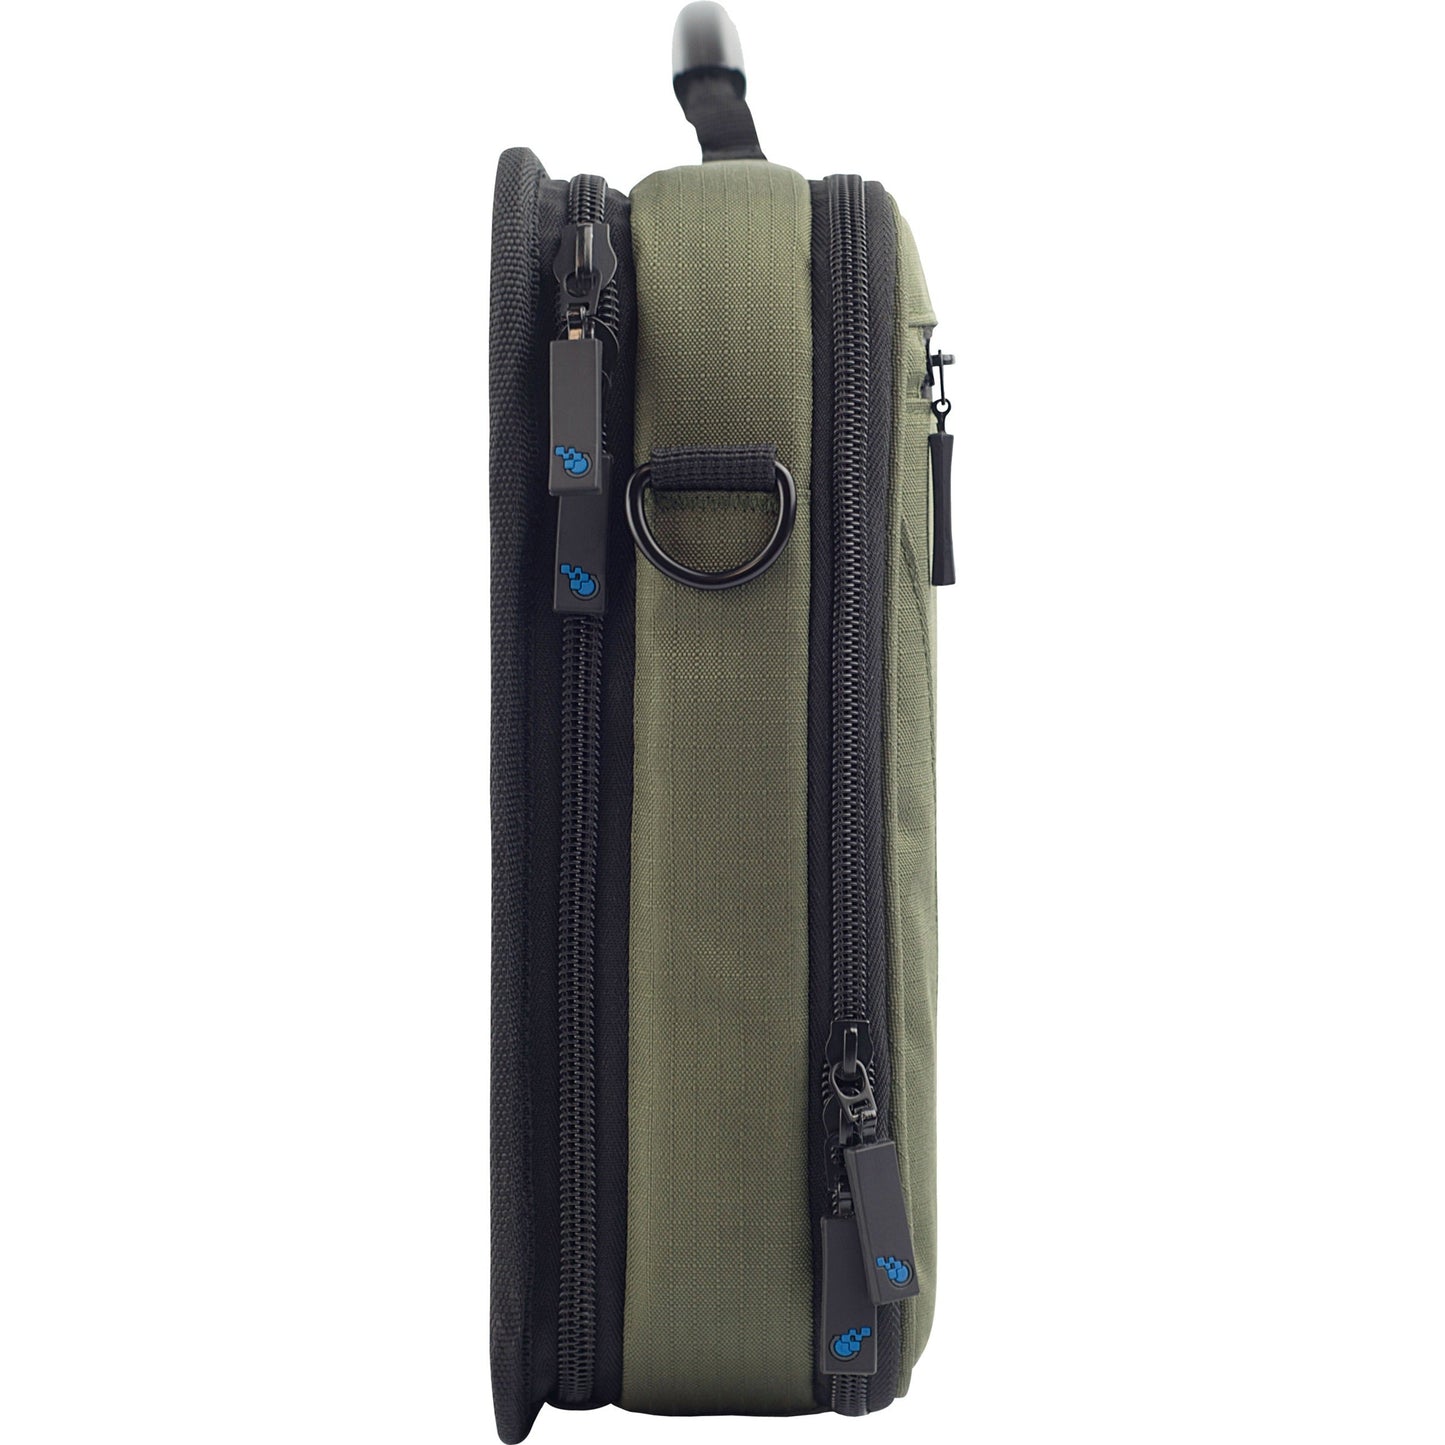 TechProducts360 Work-In Vault Carrying Case for 11" Netbook - Green